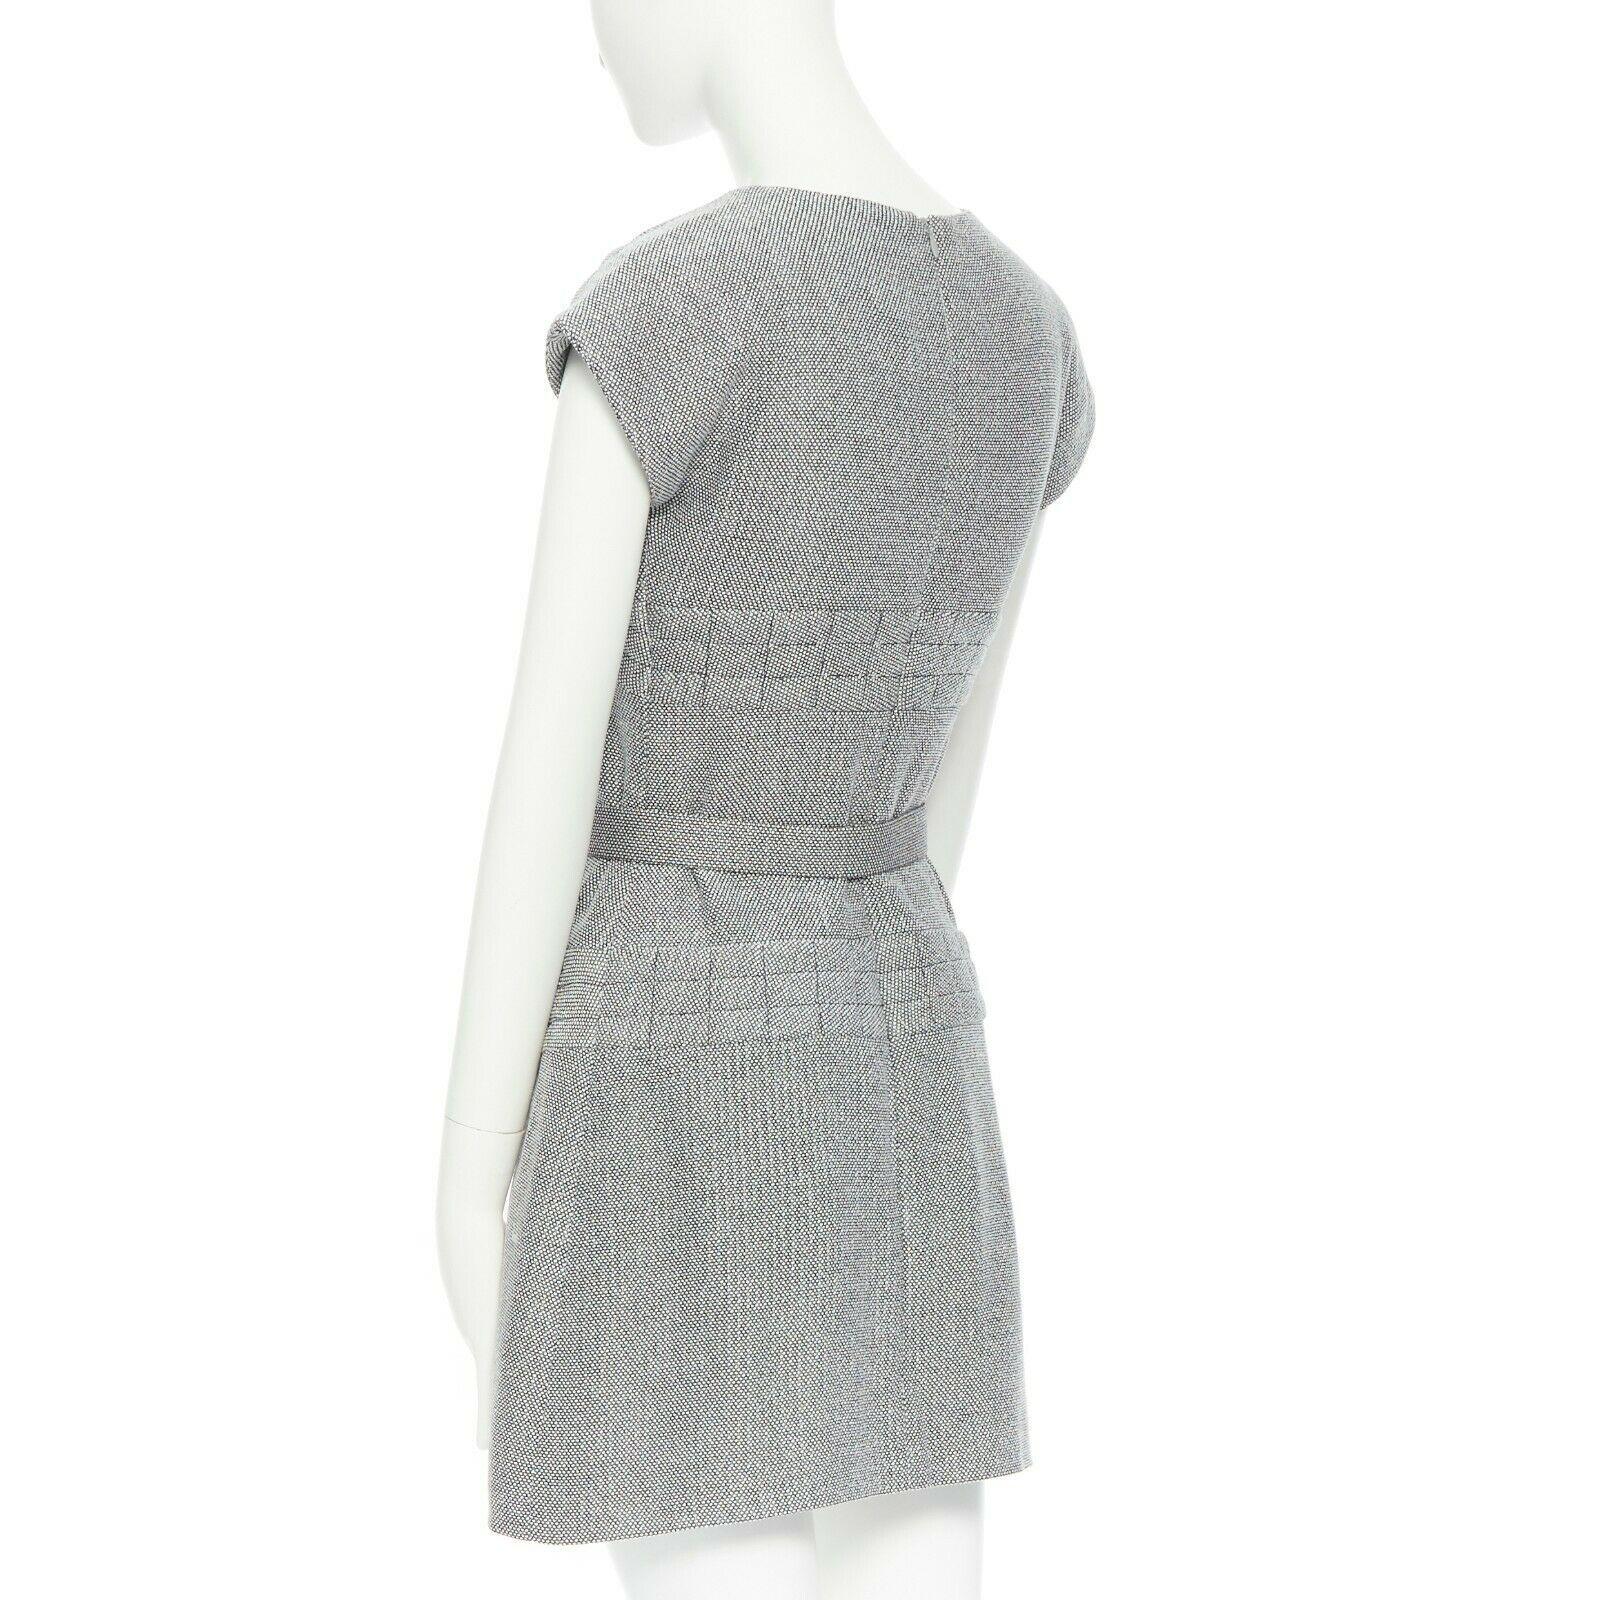 CHANEL grey white black quilted tweed cap sleeves belted bell dress FR34 XS 1